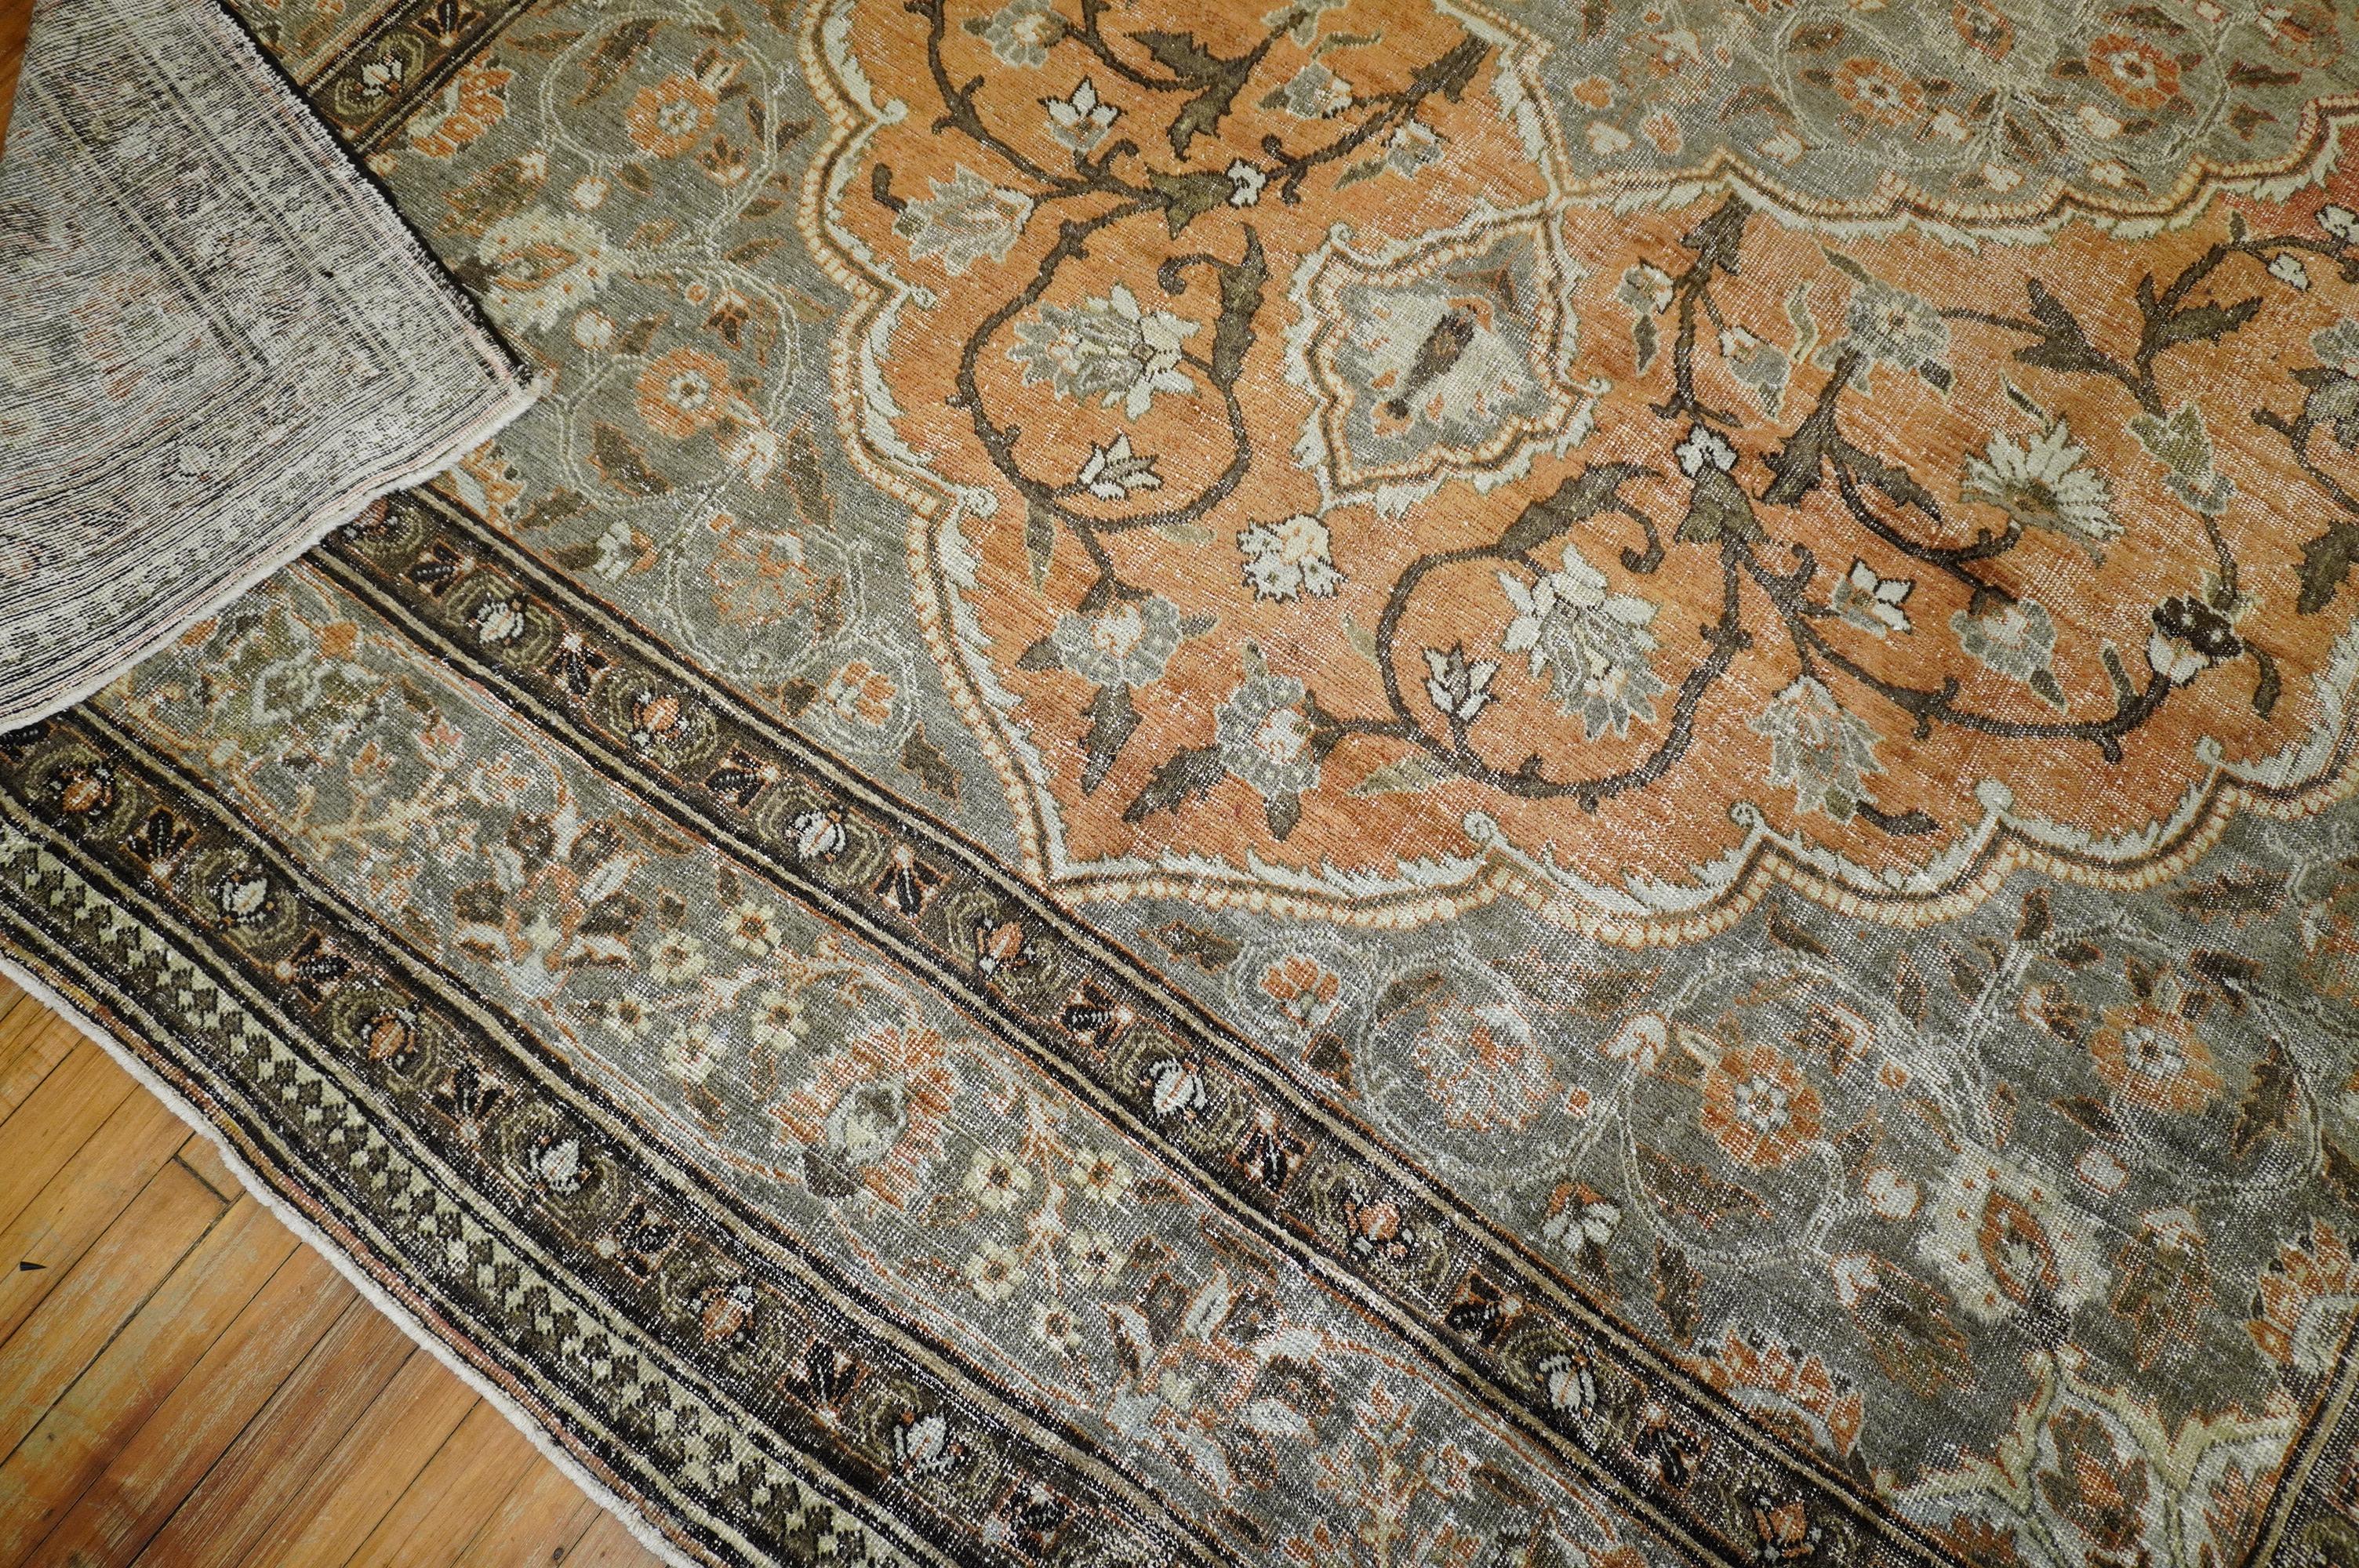 Hand-Knotted Orange Shabby Chic Persian Tabriz Room Siize Rug, Early 20th Century